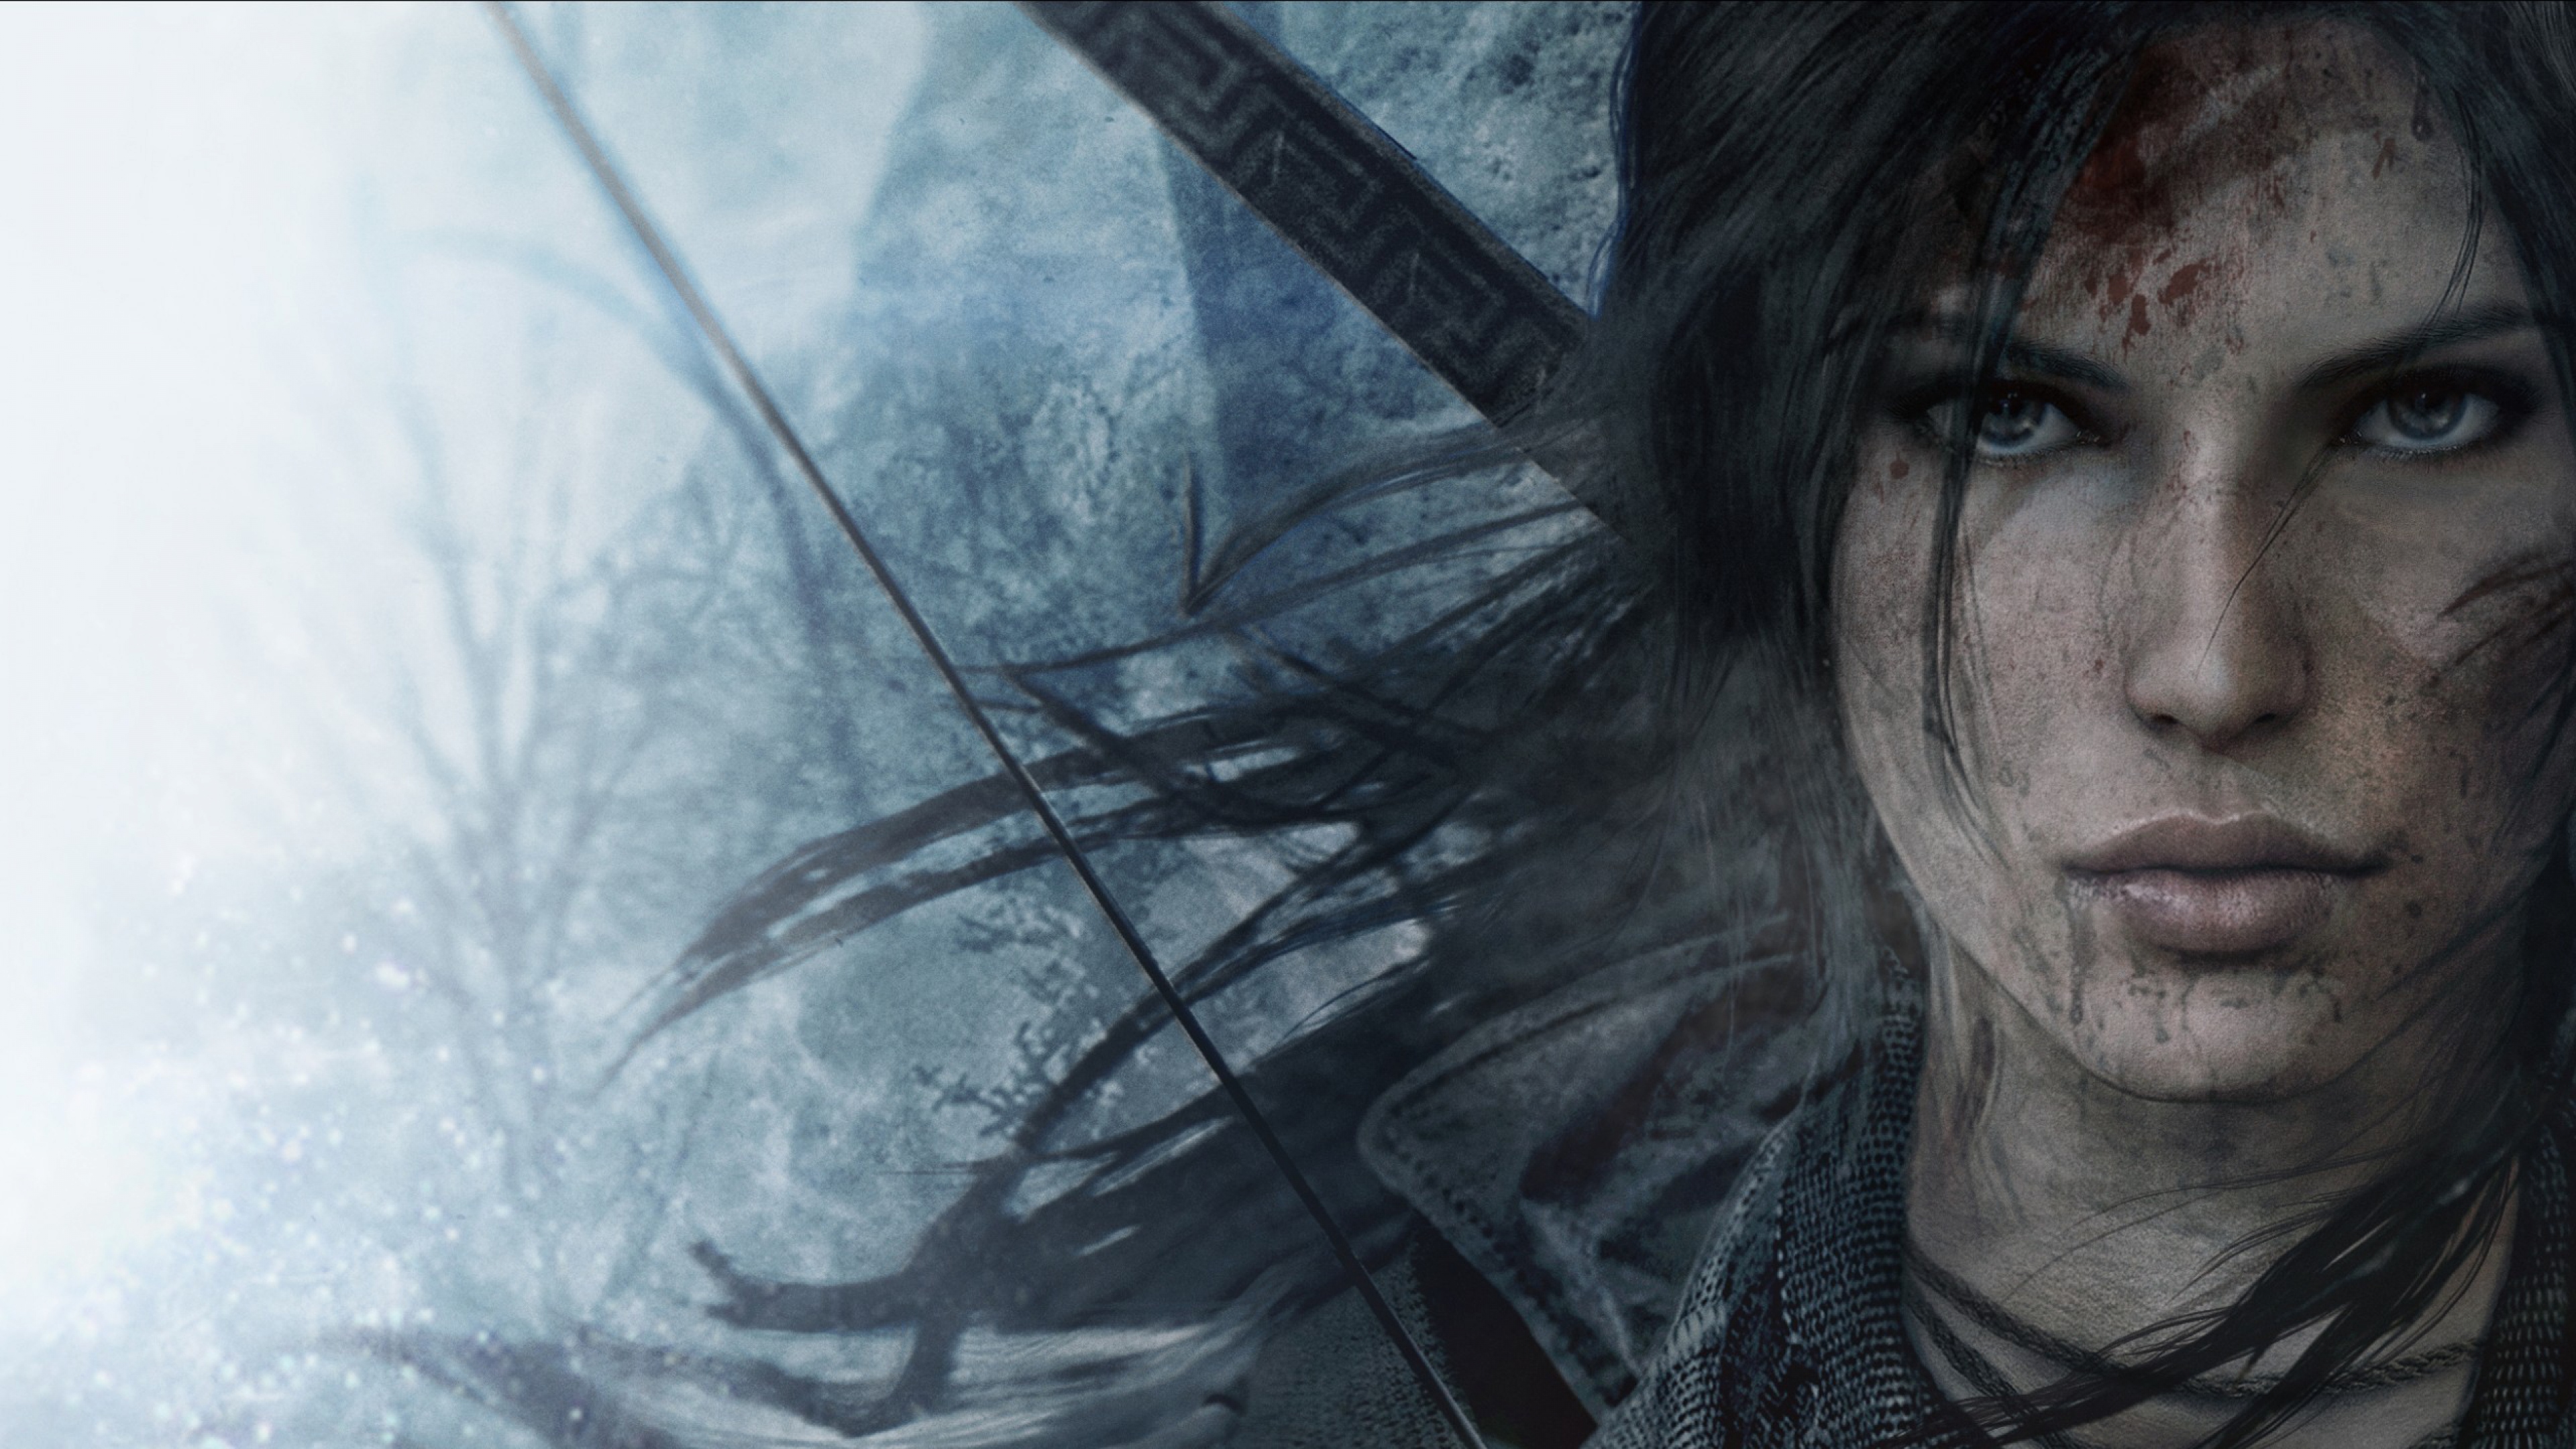 tomb raider, lara croft, video game, rise of the tomb raider cell phone wallpapers